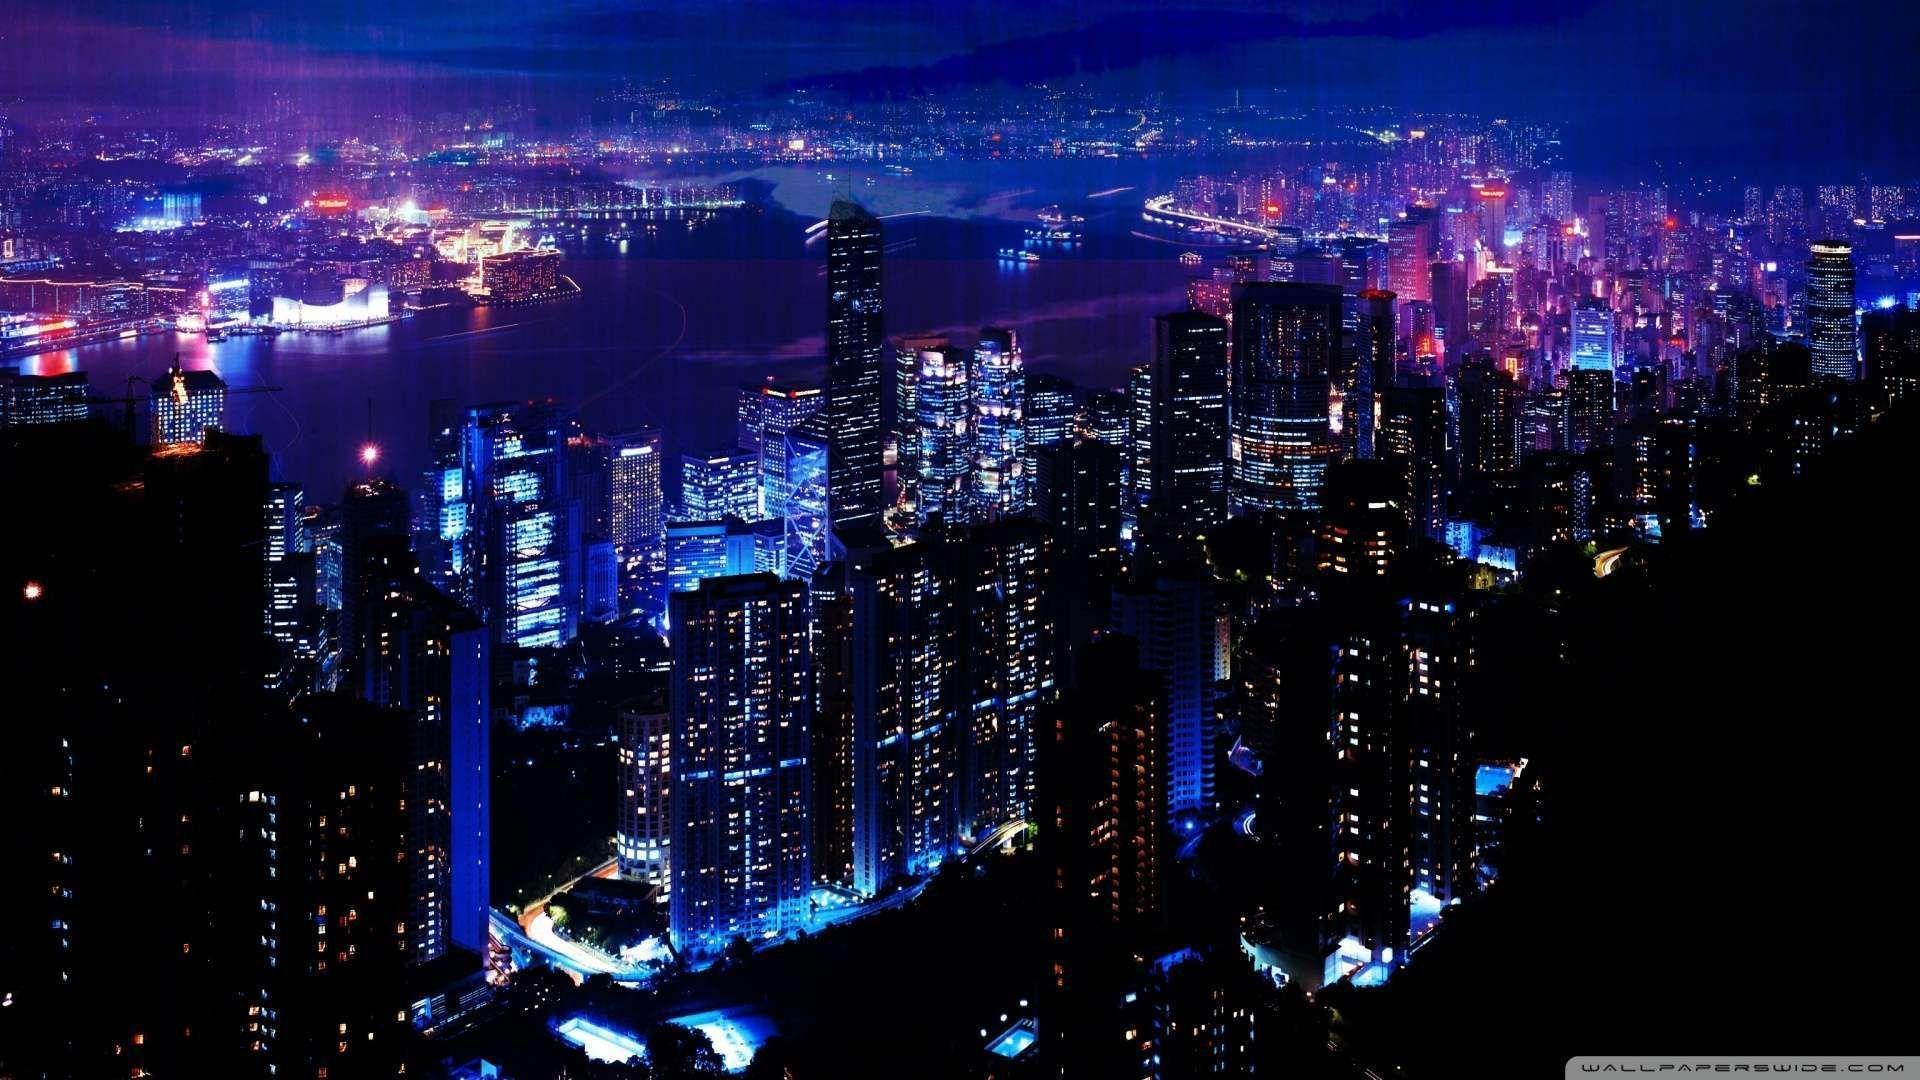 19 X 1080 Night City Wallpapers Top Free 19 X 1080 Night City Backgrounds Wallpaperaccess